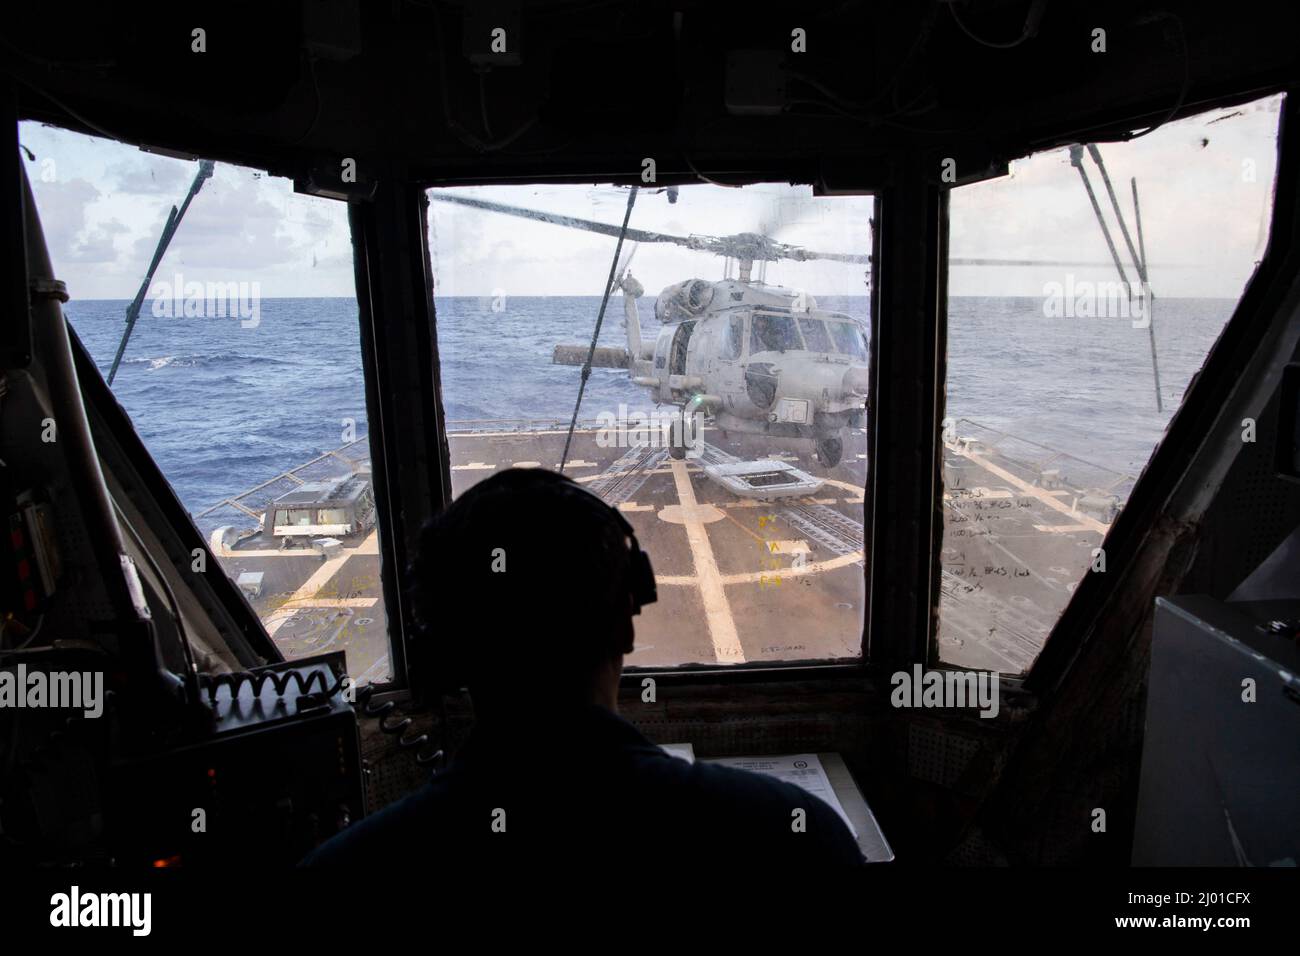 PHILIPPINE SEA (March 14, 2022) Lt. j.g. Jian Miclat, from Chula Vista, California, acts as the helicopter control officer and coordinates with the bridge and landing signalman officer for the launch of a MH-60R helicopter assigned to Helicopter Maritime Strike Squadron (HSM) 51 from the deck of the Arleigh Burke-class guided-missile destroyer USS Dewey (DDG 105) while conducting routine operations underway in the U.S. 7th Fleet area of responsibility. Dewey is assigned to Destroyer Squadron (DESRON) 15 and is underway supporting a free and open Indo-Pacific. CTF 71/DESRON 15 is the Navy’s lar Stock Photo